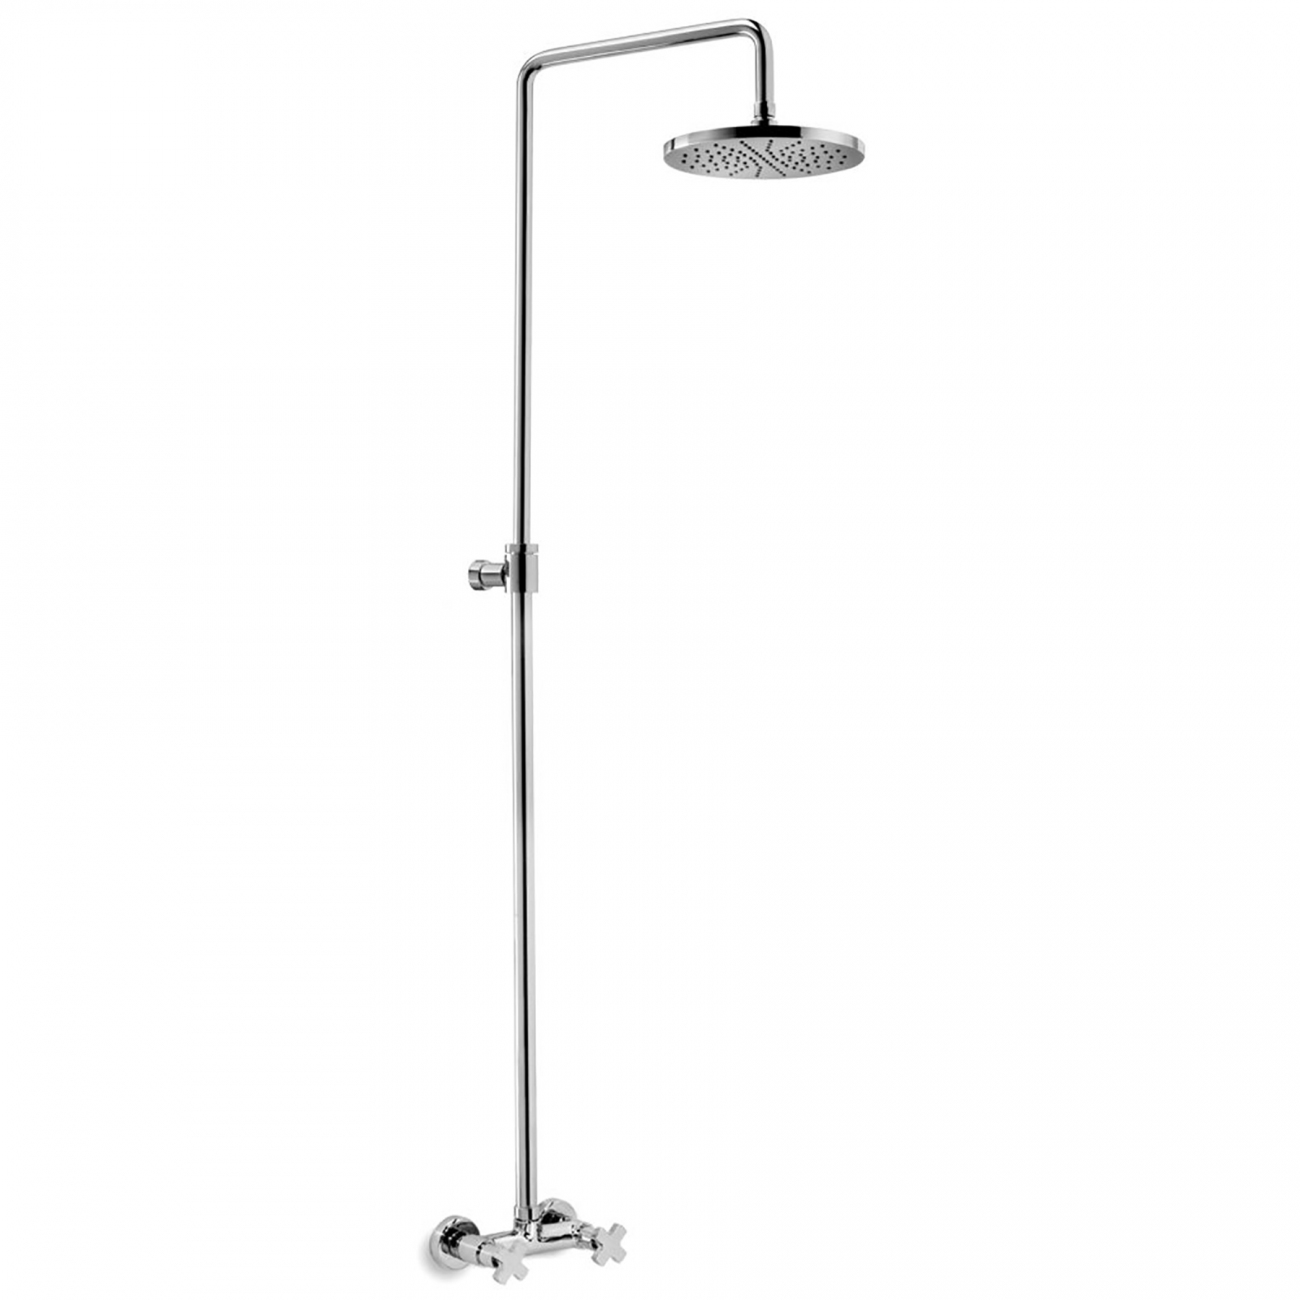 Bongio Style Alcor External Shower Group with Tube